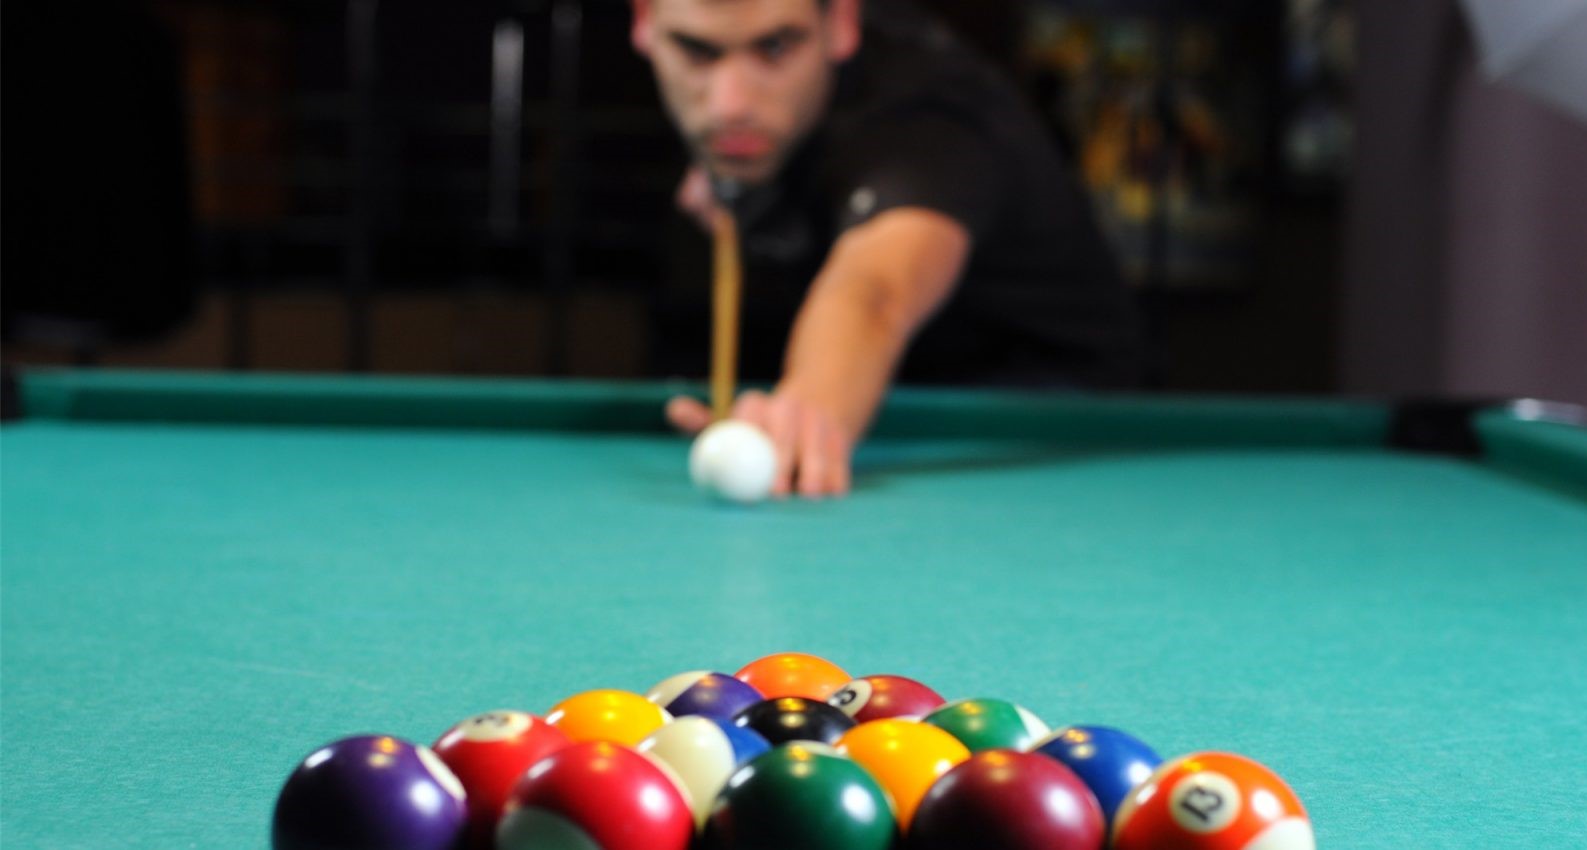 15 Facts About Billiards - Facts.net